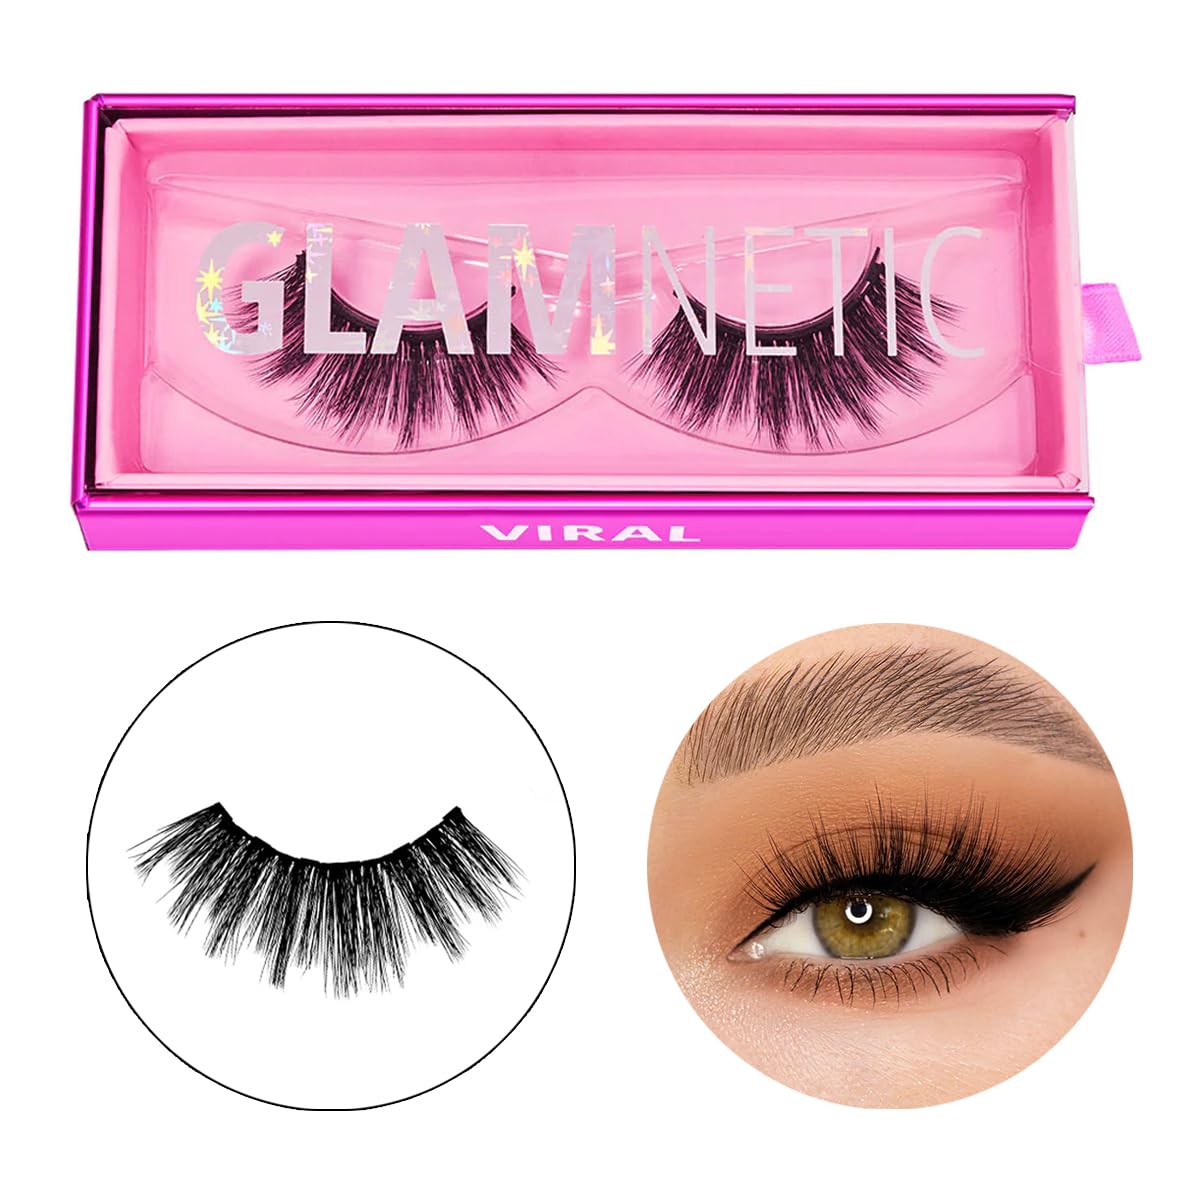 Magnetic Eyelashes – Viral | Artificial Magnetic Lashes, Made with Synthetic Faux Mink Fiber, Comfortable and Natural Lash Extention Look, Reusable Up To 60 Times, Long Wispy 15mm, 1 Pair